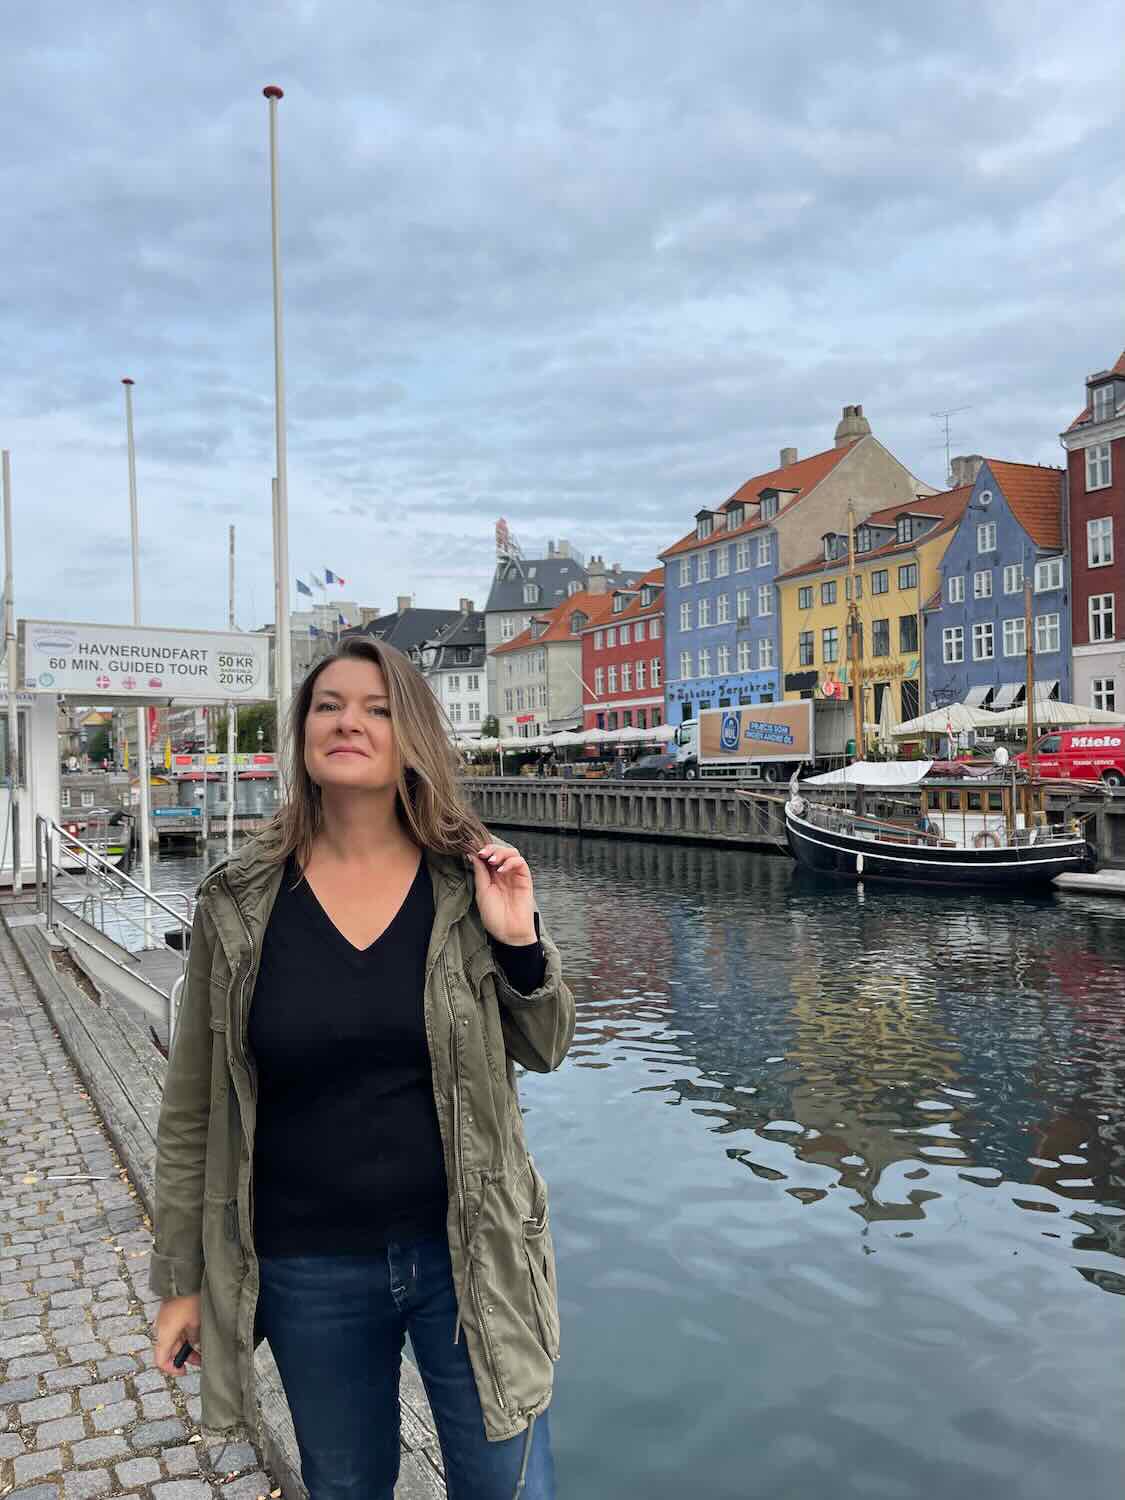 A woman standing in Nyhavn Harbor with colorful buildings and boats in the background.